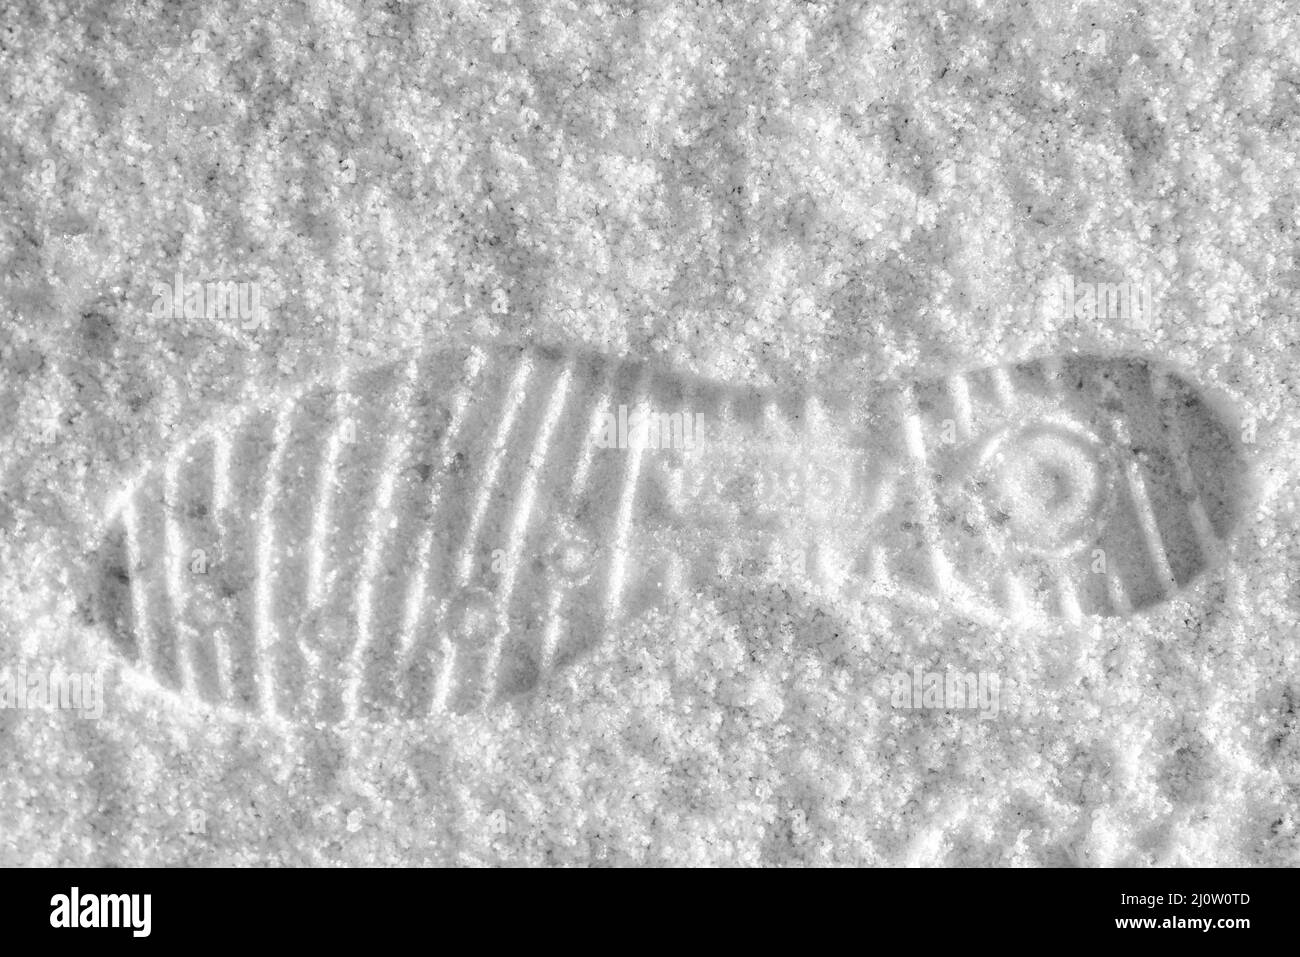 Shoe print in the snow - black and white footsteps Stock Photo